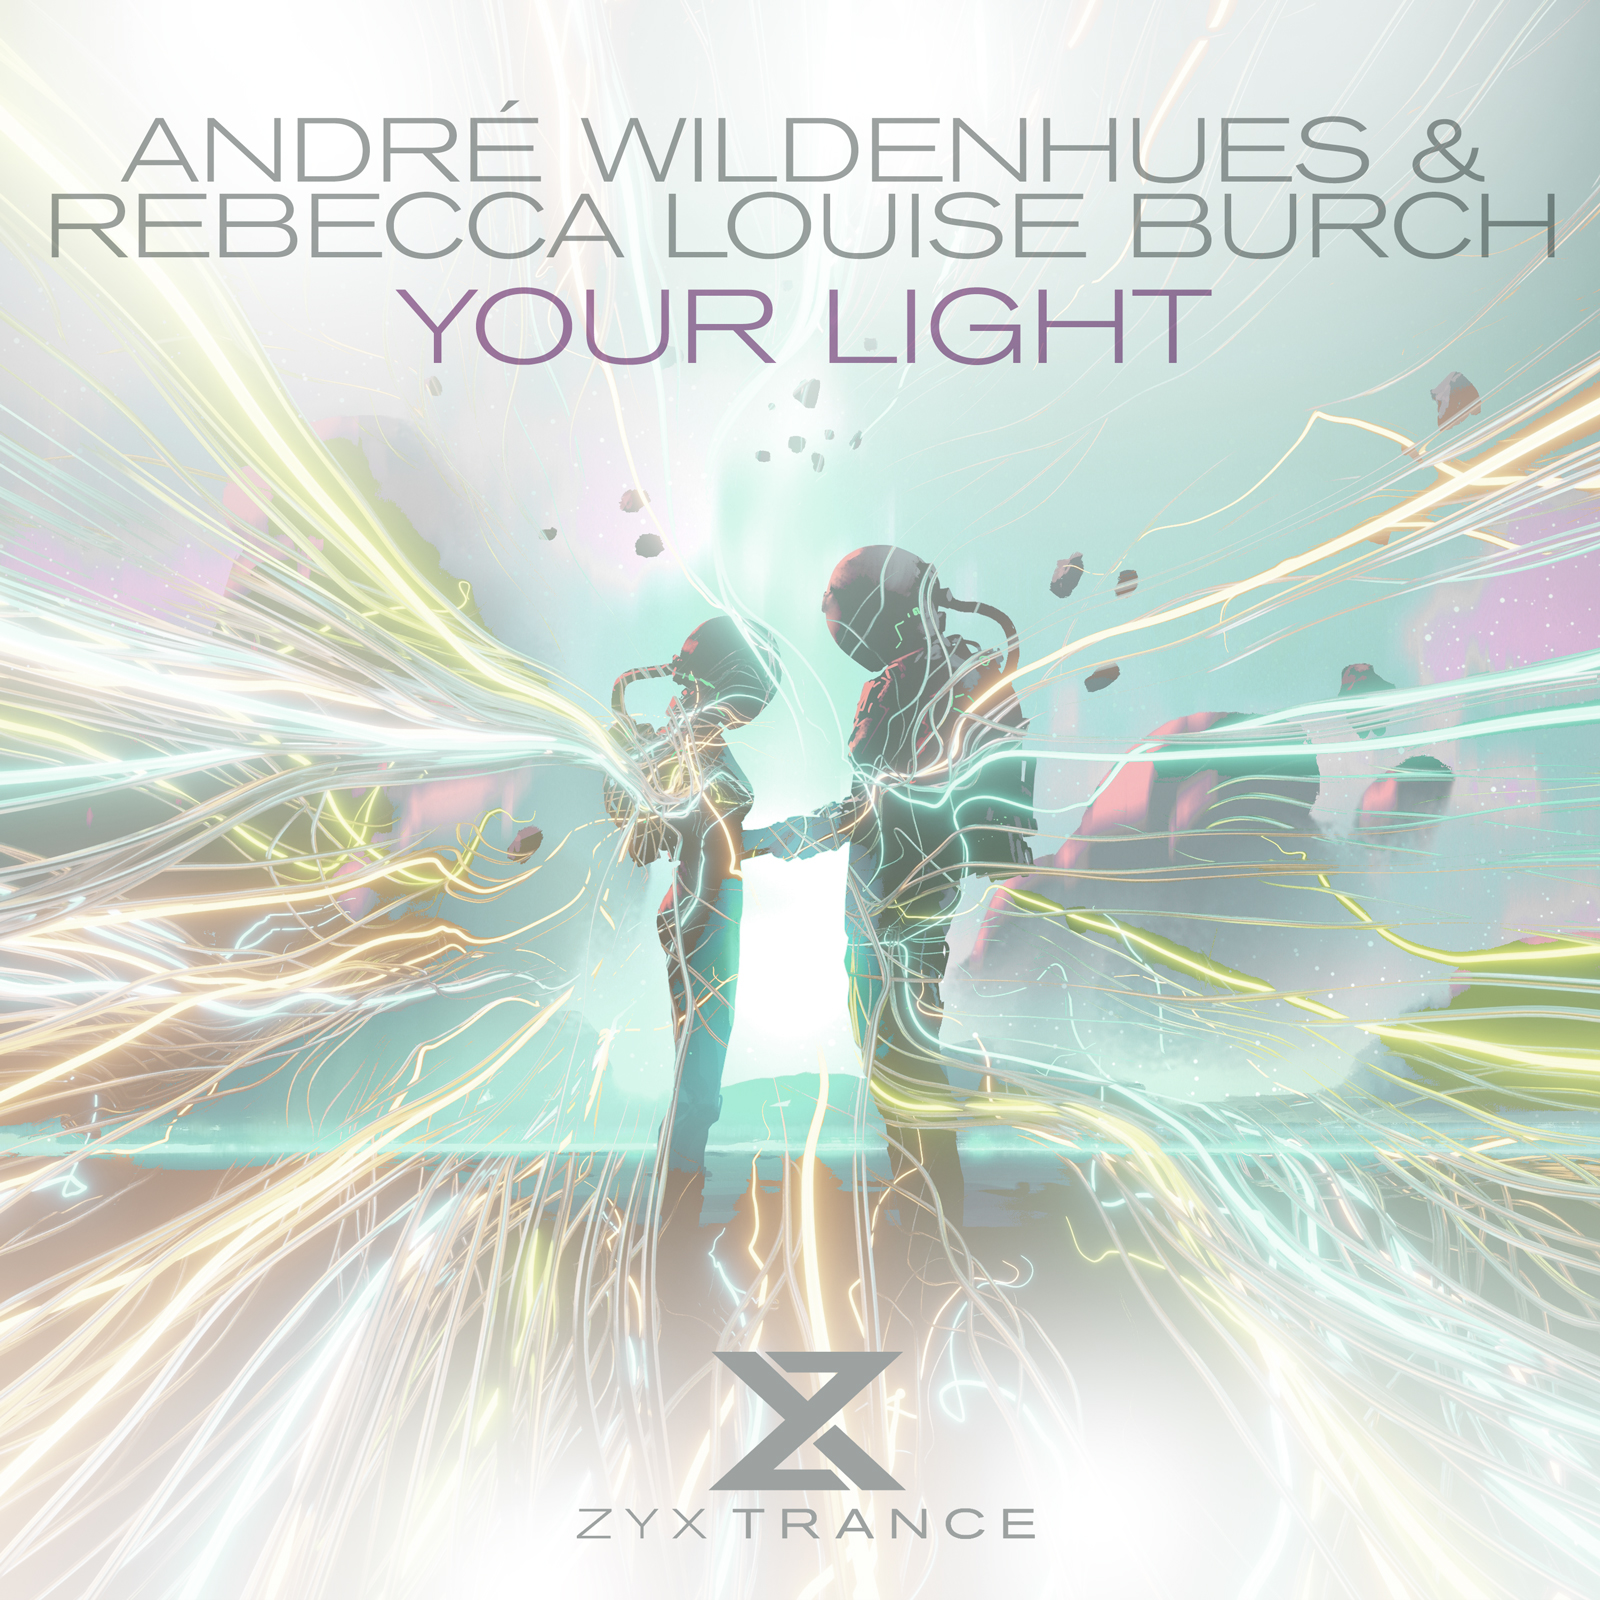 André Wildenhues & Rebecca Louise Burch - Your Light